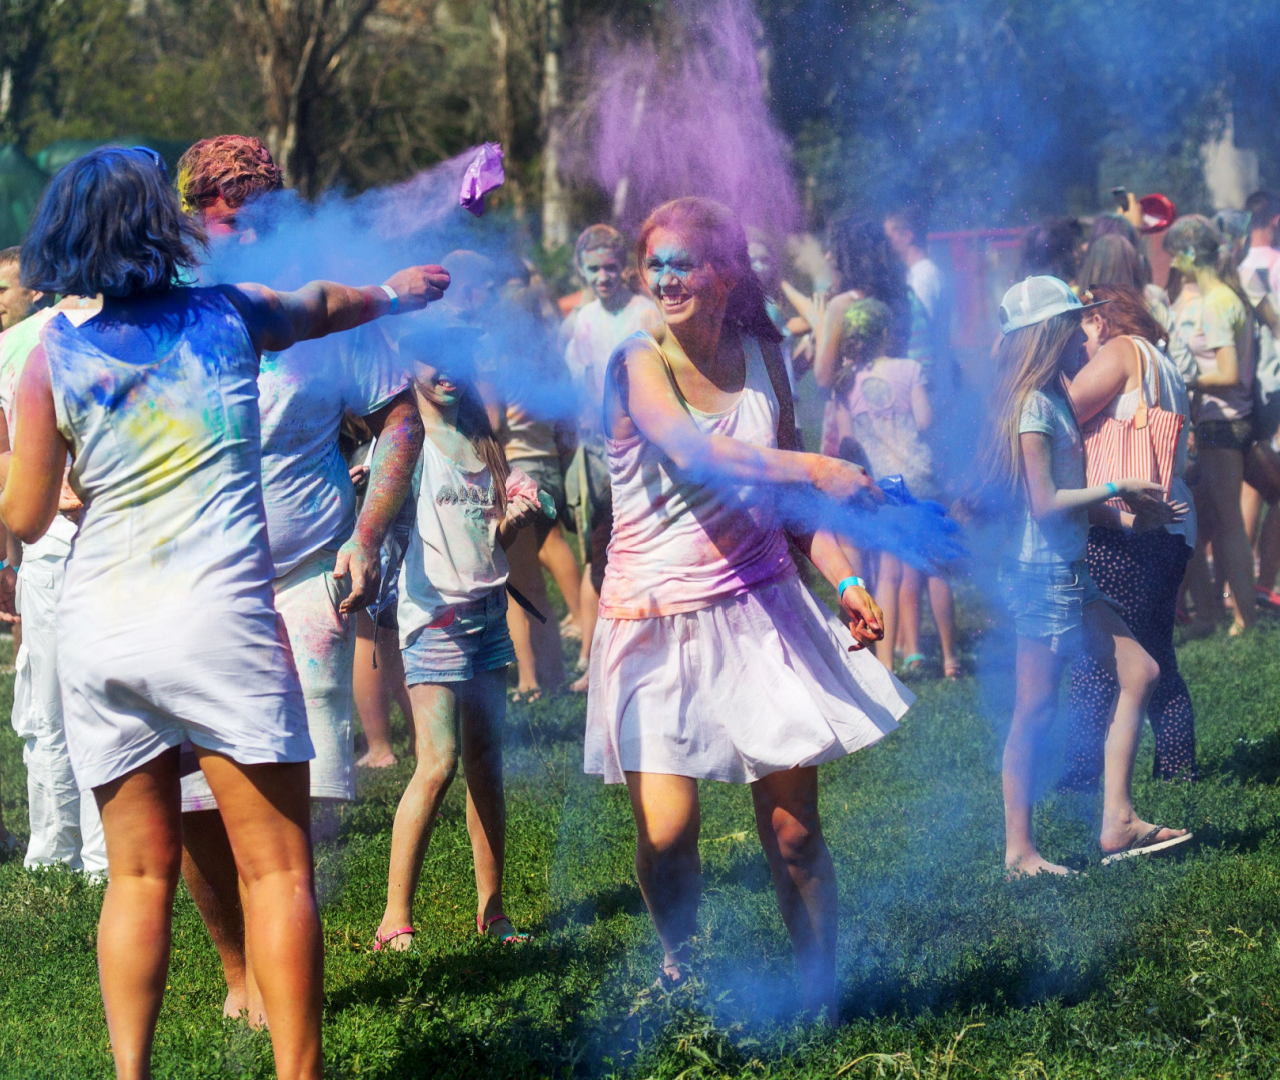 An example of the supporter viewer type: A person in a group of people throwing pigment at each other.